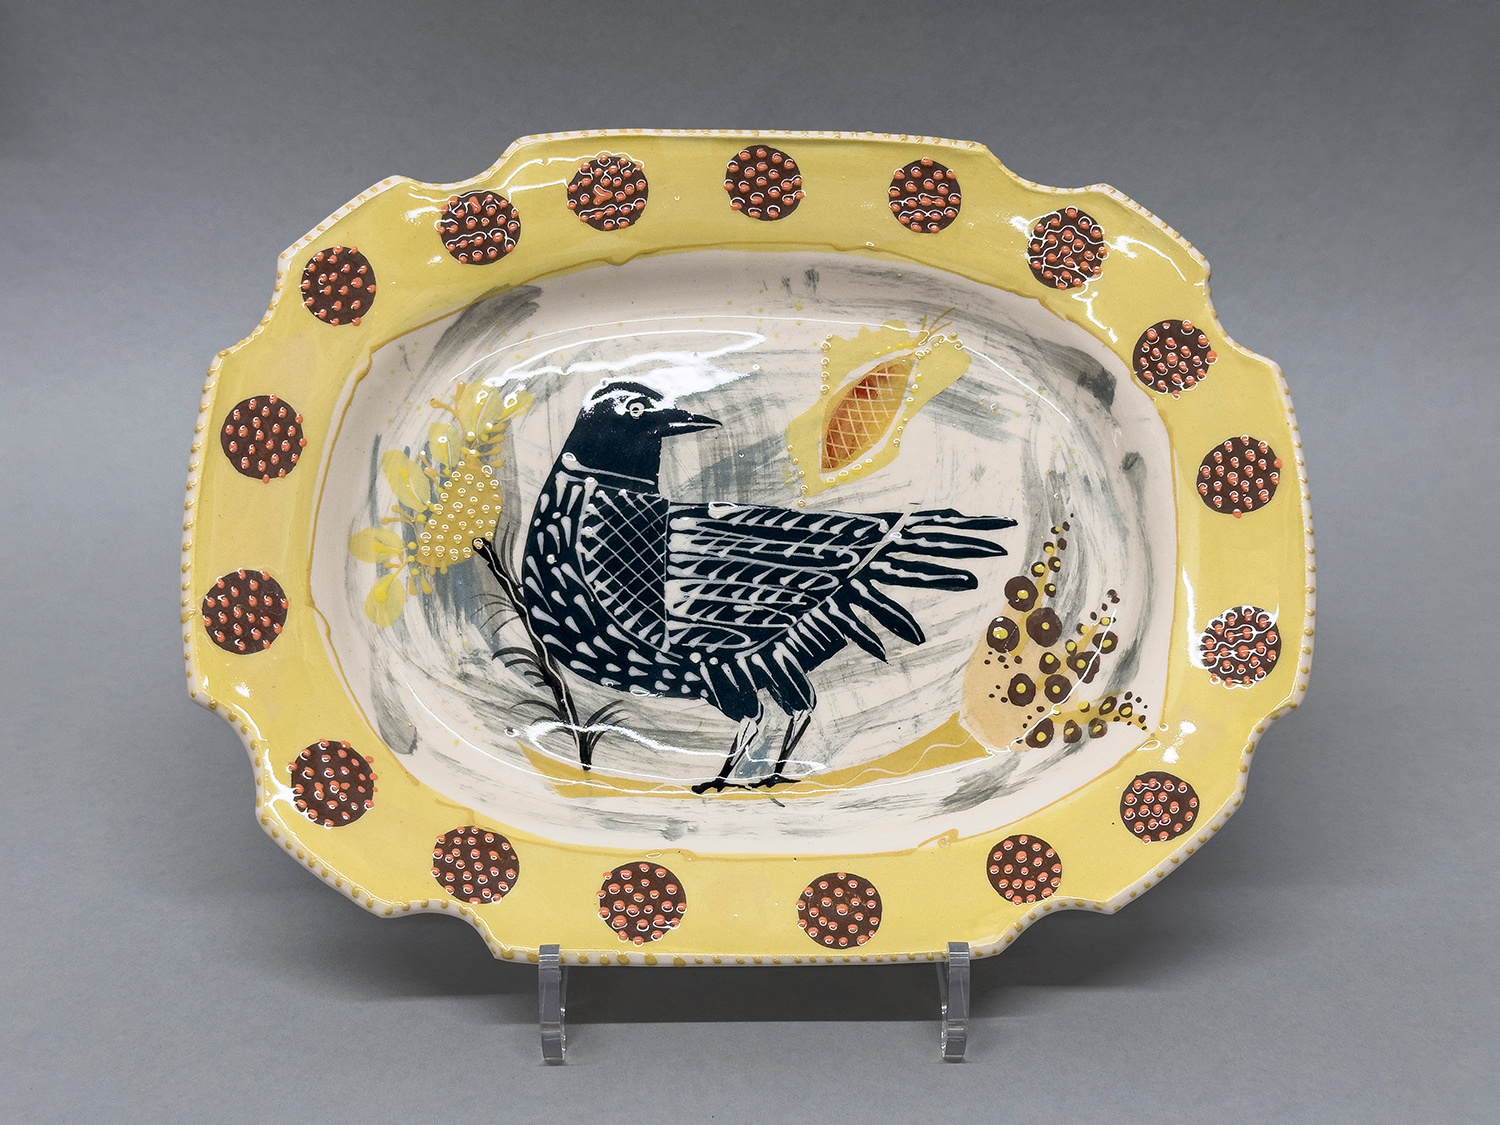 Small Oval Plate 'Bird with Flowers' by Irena Sibrijns